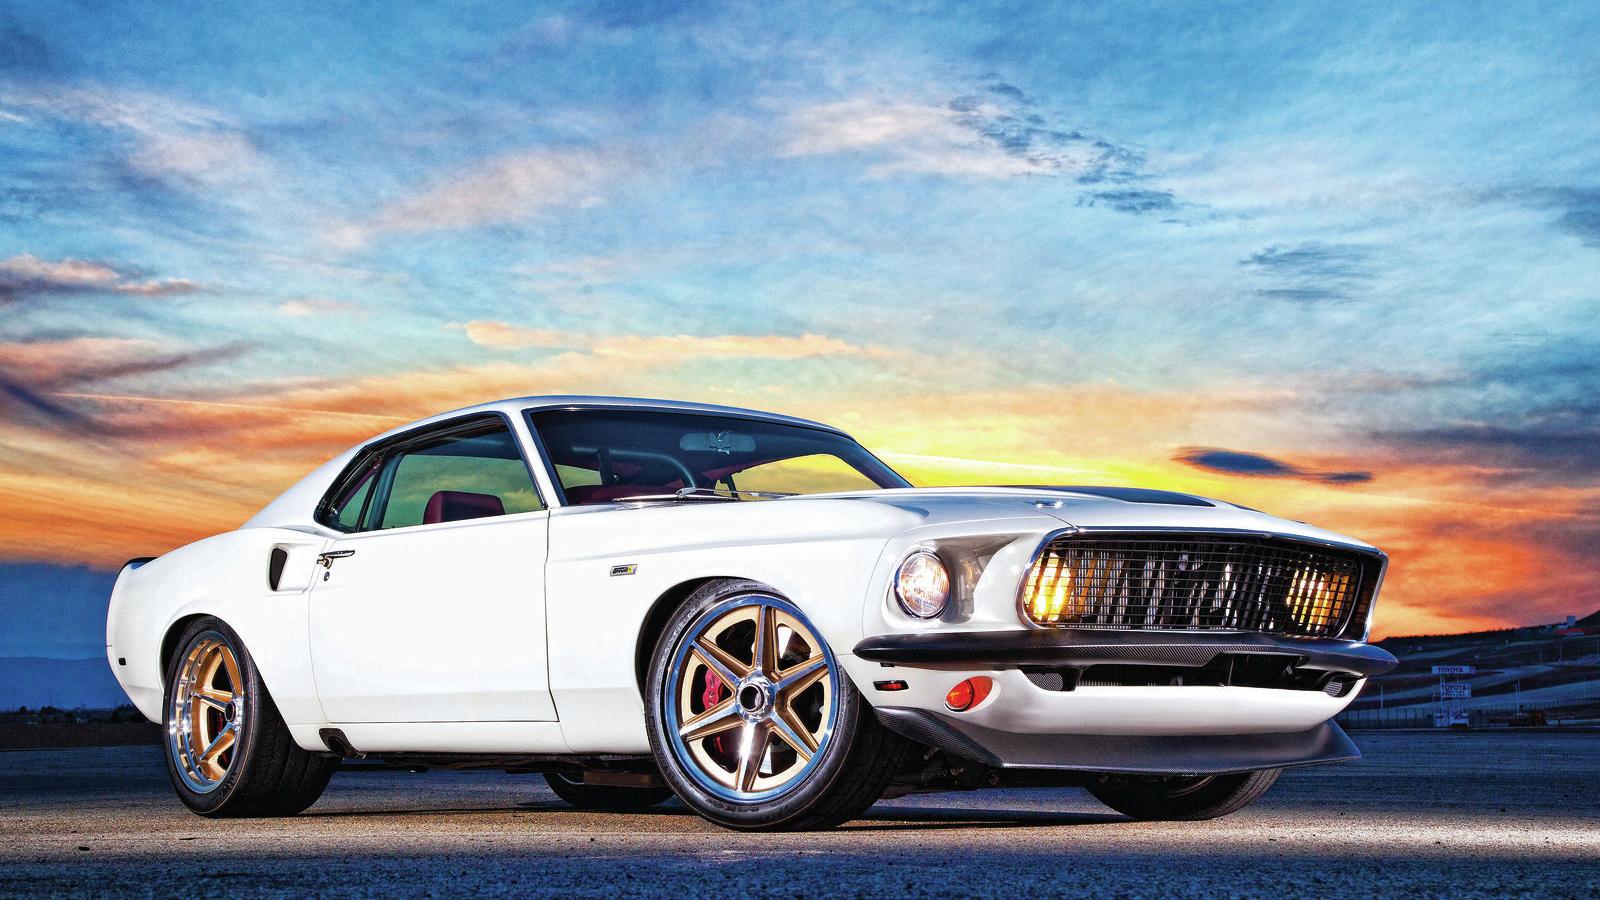 Mustang Of The Day: 1969 Ford Mustang "Anvil"